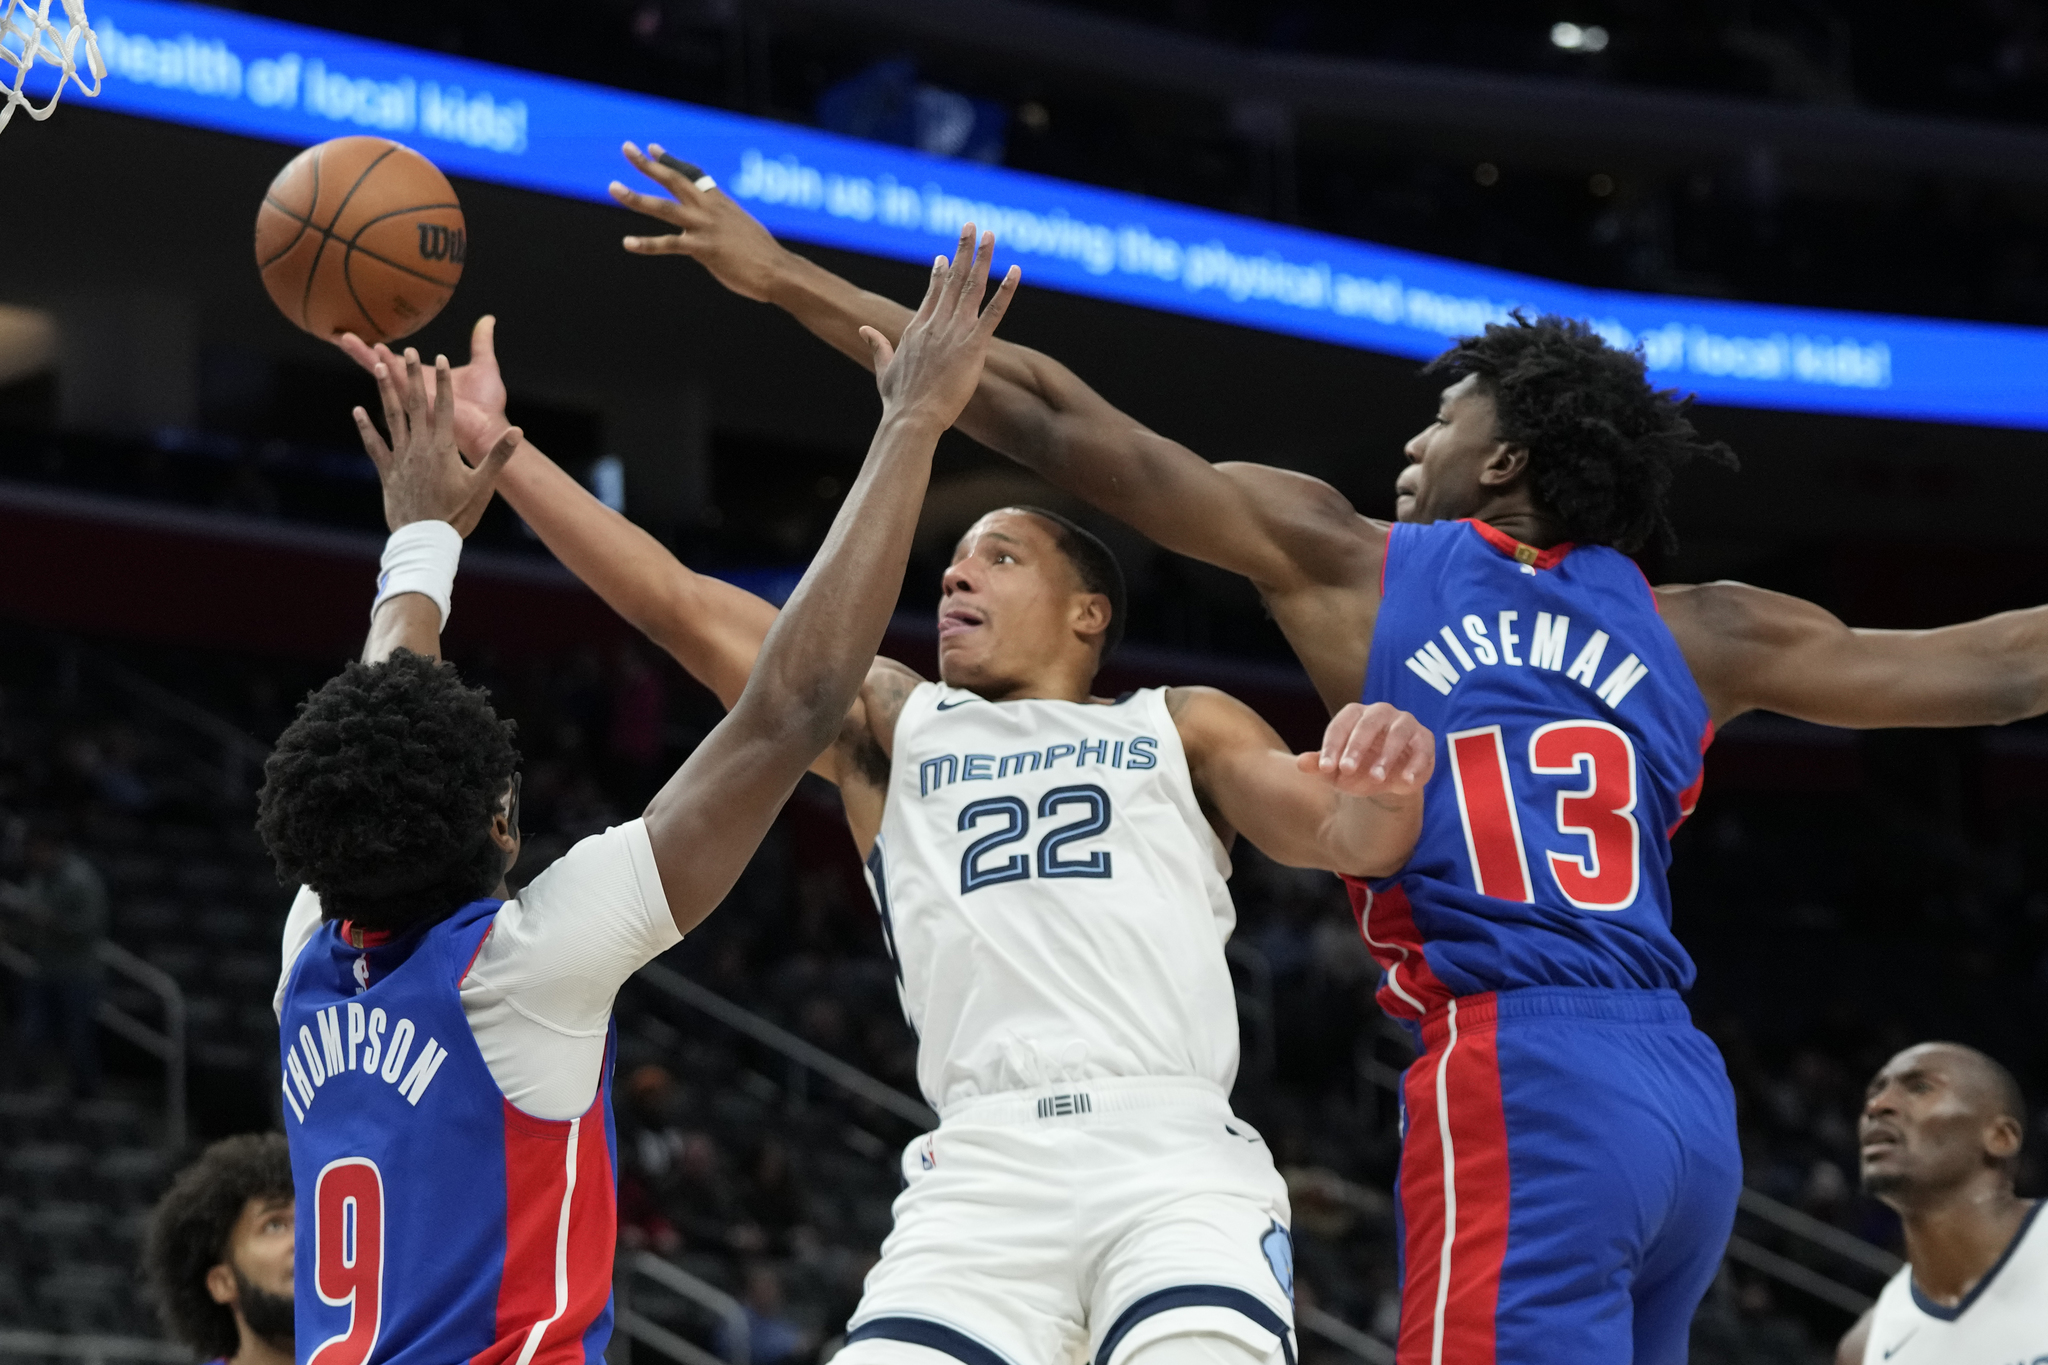 Desmond Bane (center) dropped 49 points on the Pistons to spearhead Memphis comeback win.